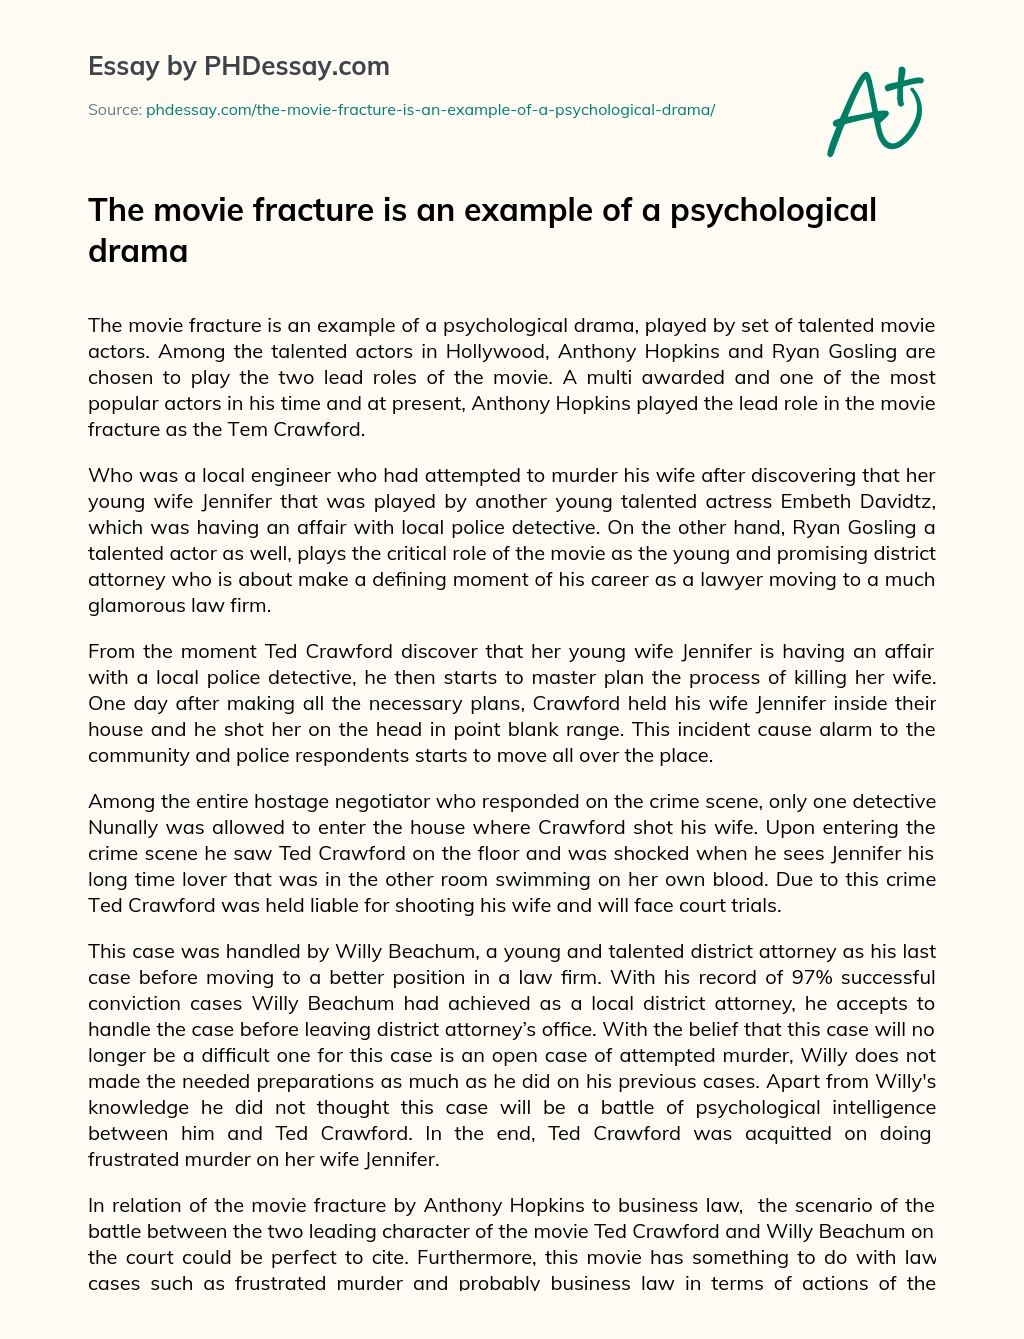 The movie fracture is an example of a psychological drama essay